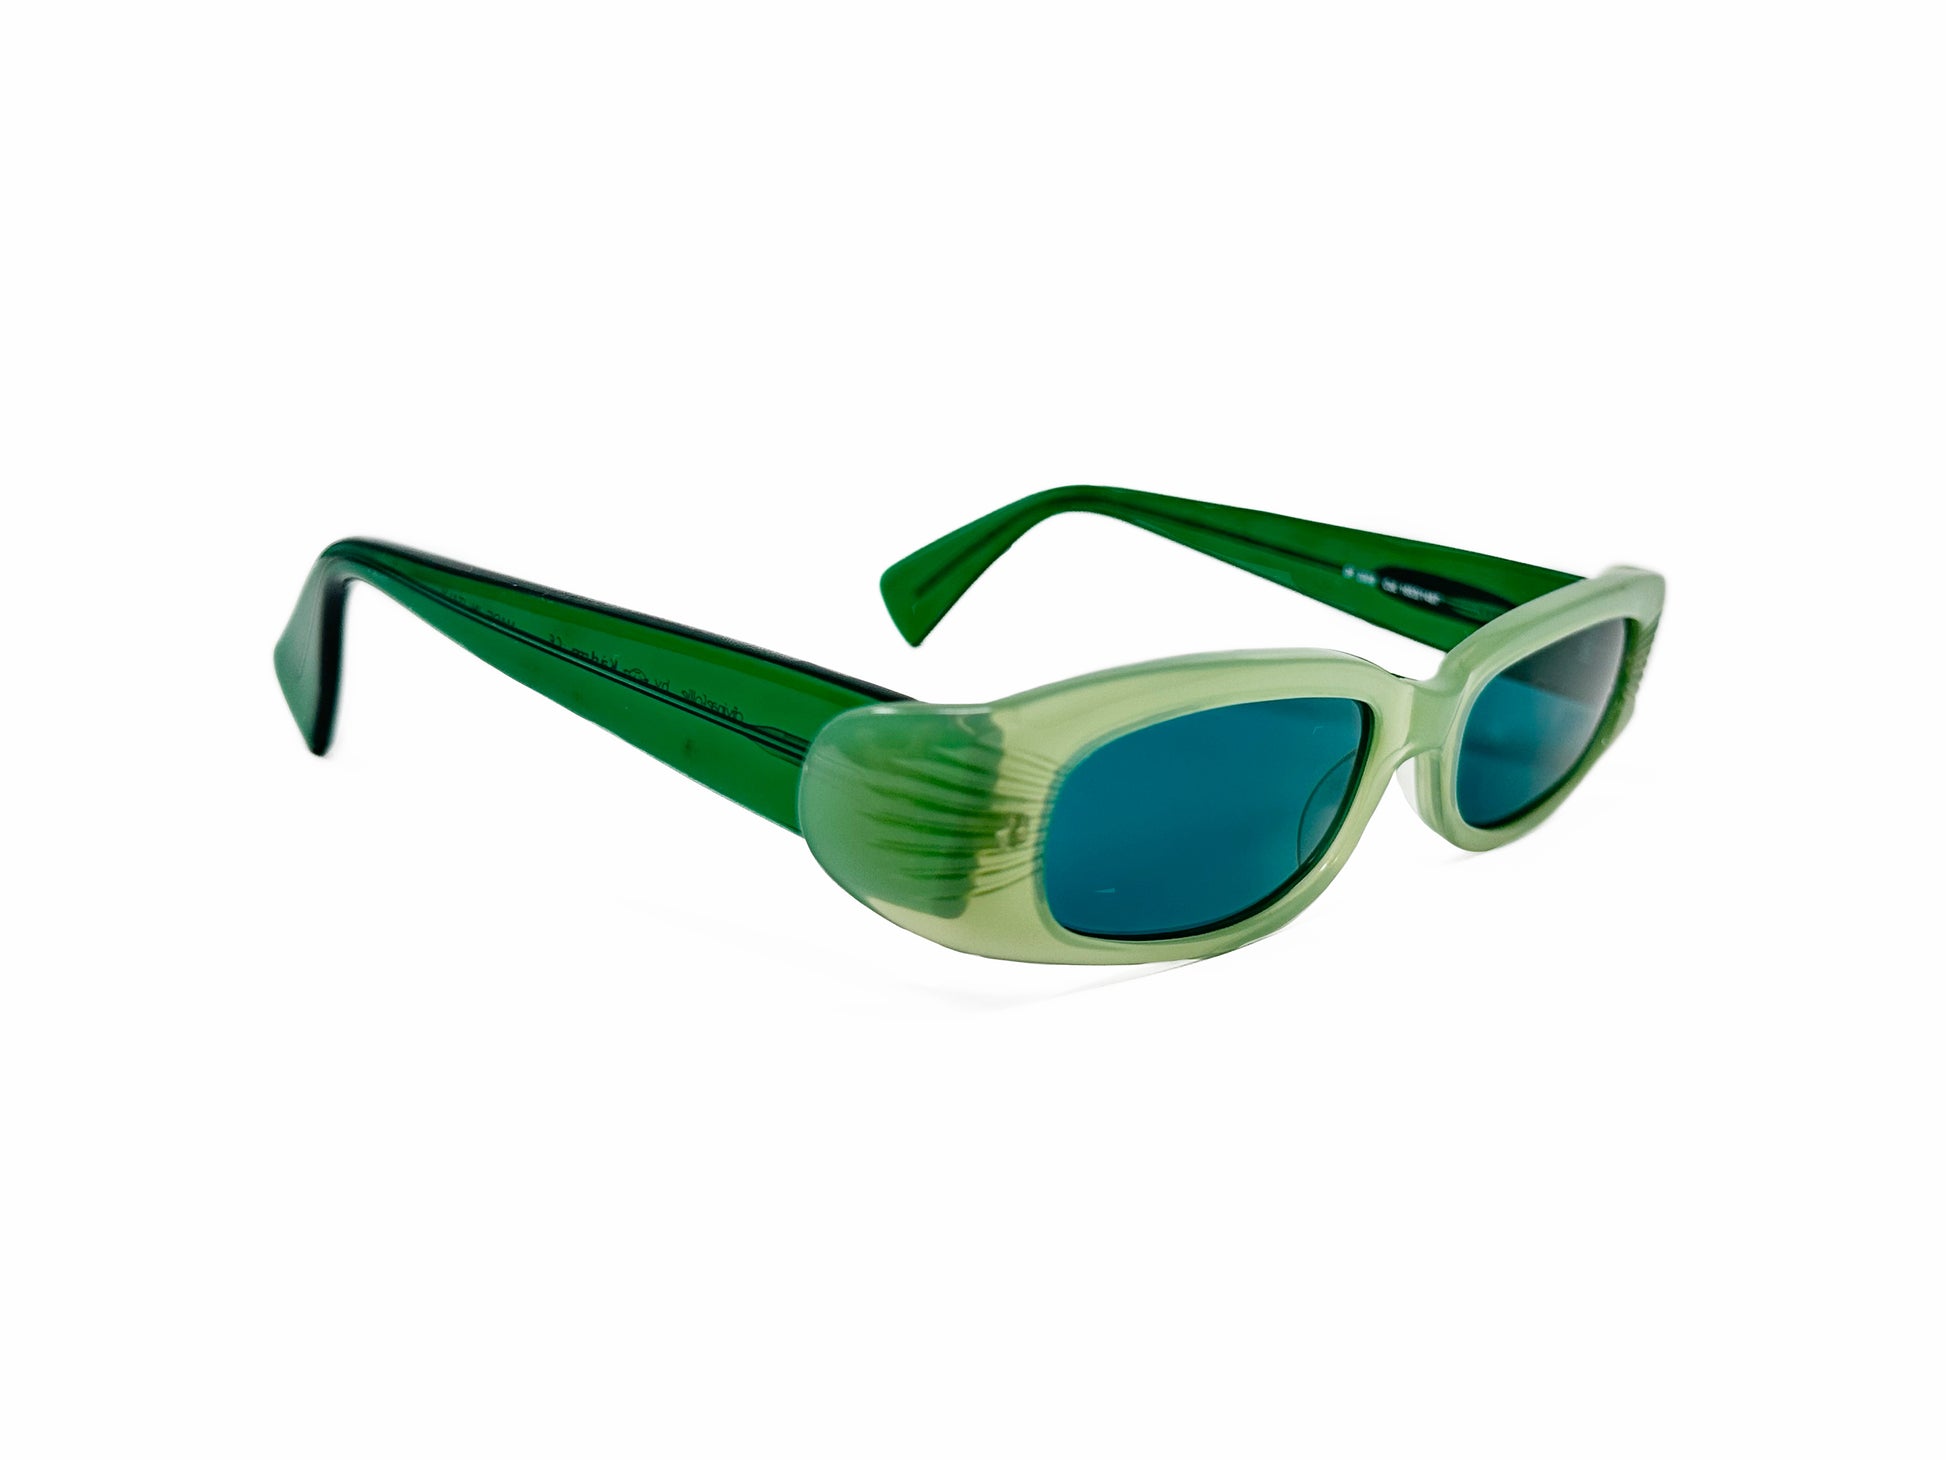 Kador rectangular, acetate sunglass with wing design on sides. Model: DF2008. Color: 1653/1487 - light, semi-transparent emerald green with blue lenses. Side view.